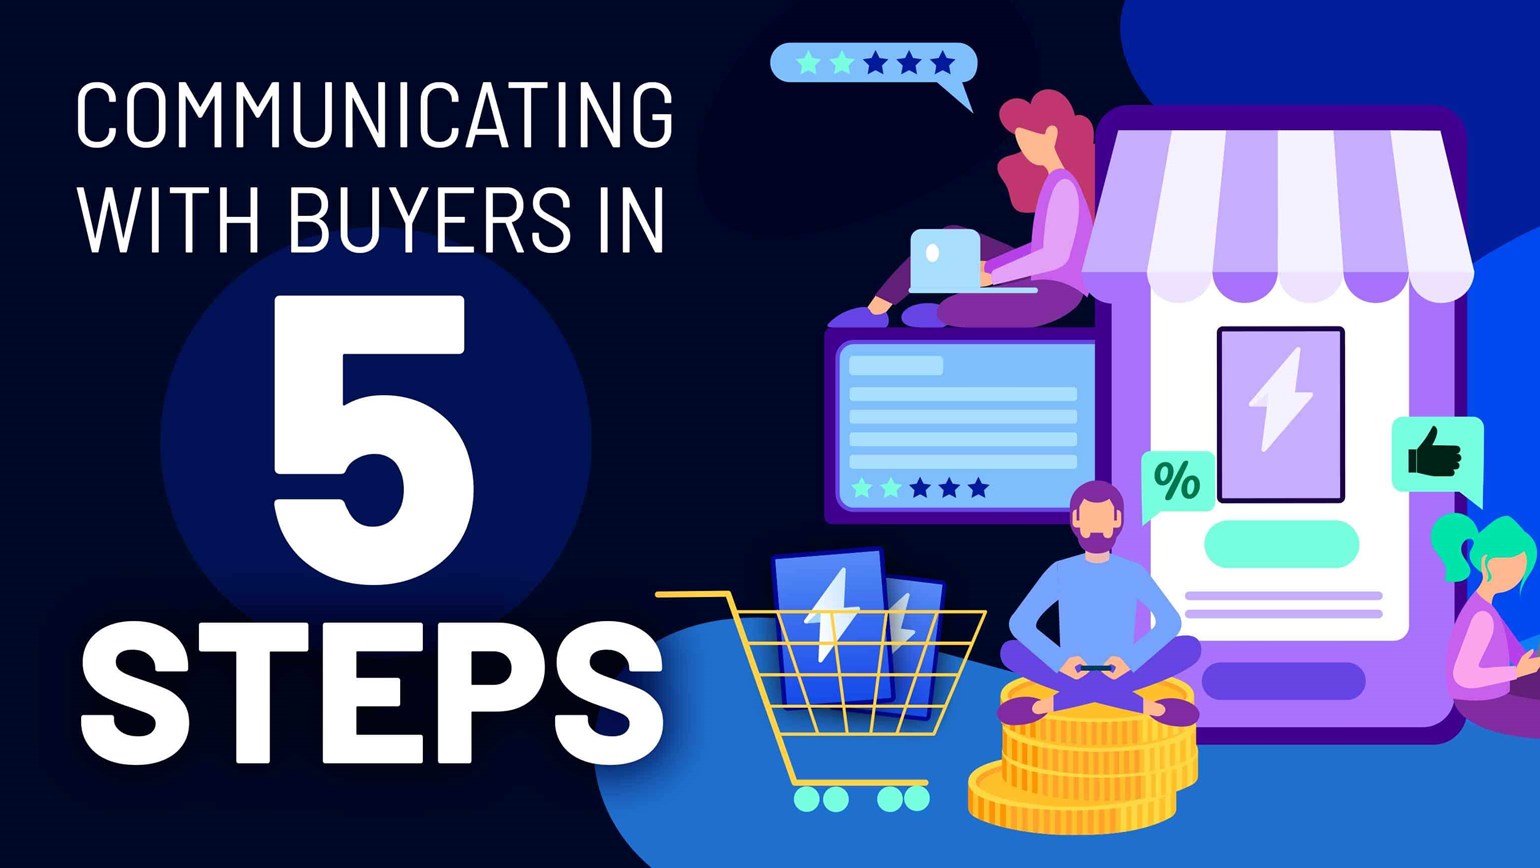 Buyer Communications 101: Communicating with Buyers in 5 Steps